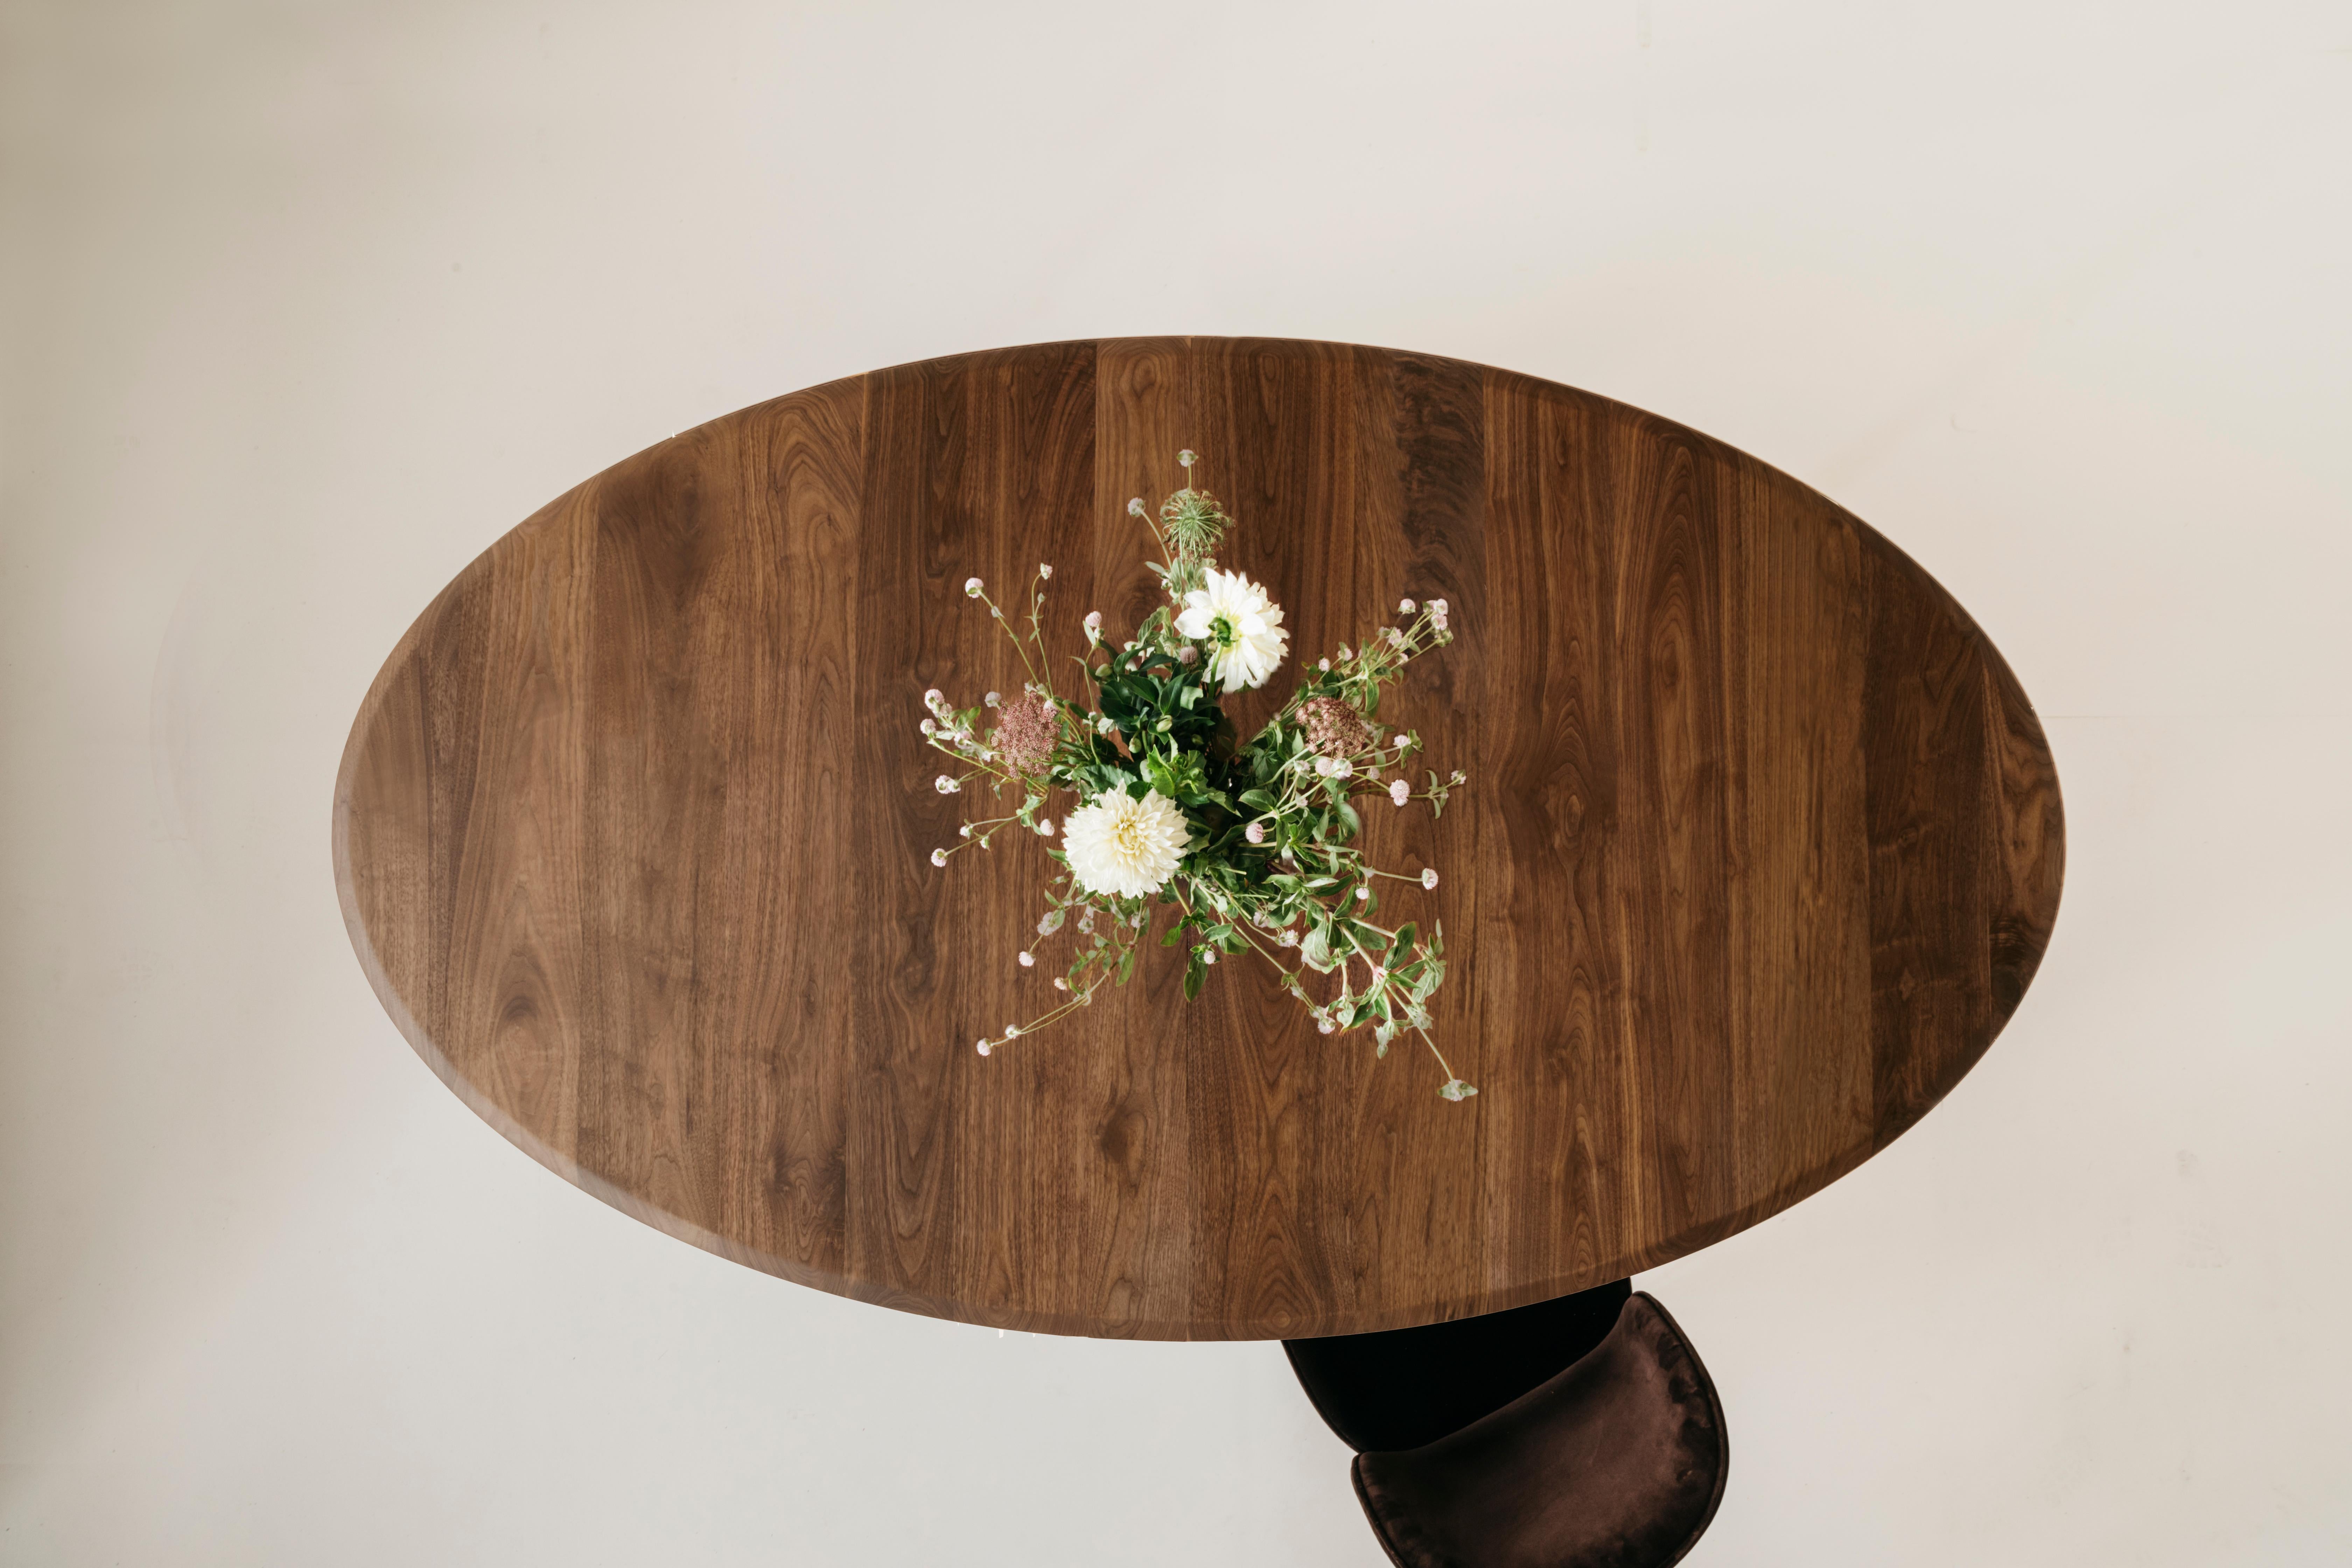 The Richard Watson oval dining table provides a comfortable, intimate shape to dine with others. This table can extend by use of smooth extension hardware that expands to hold a 20” leaf. Measure: 90